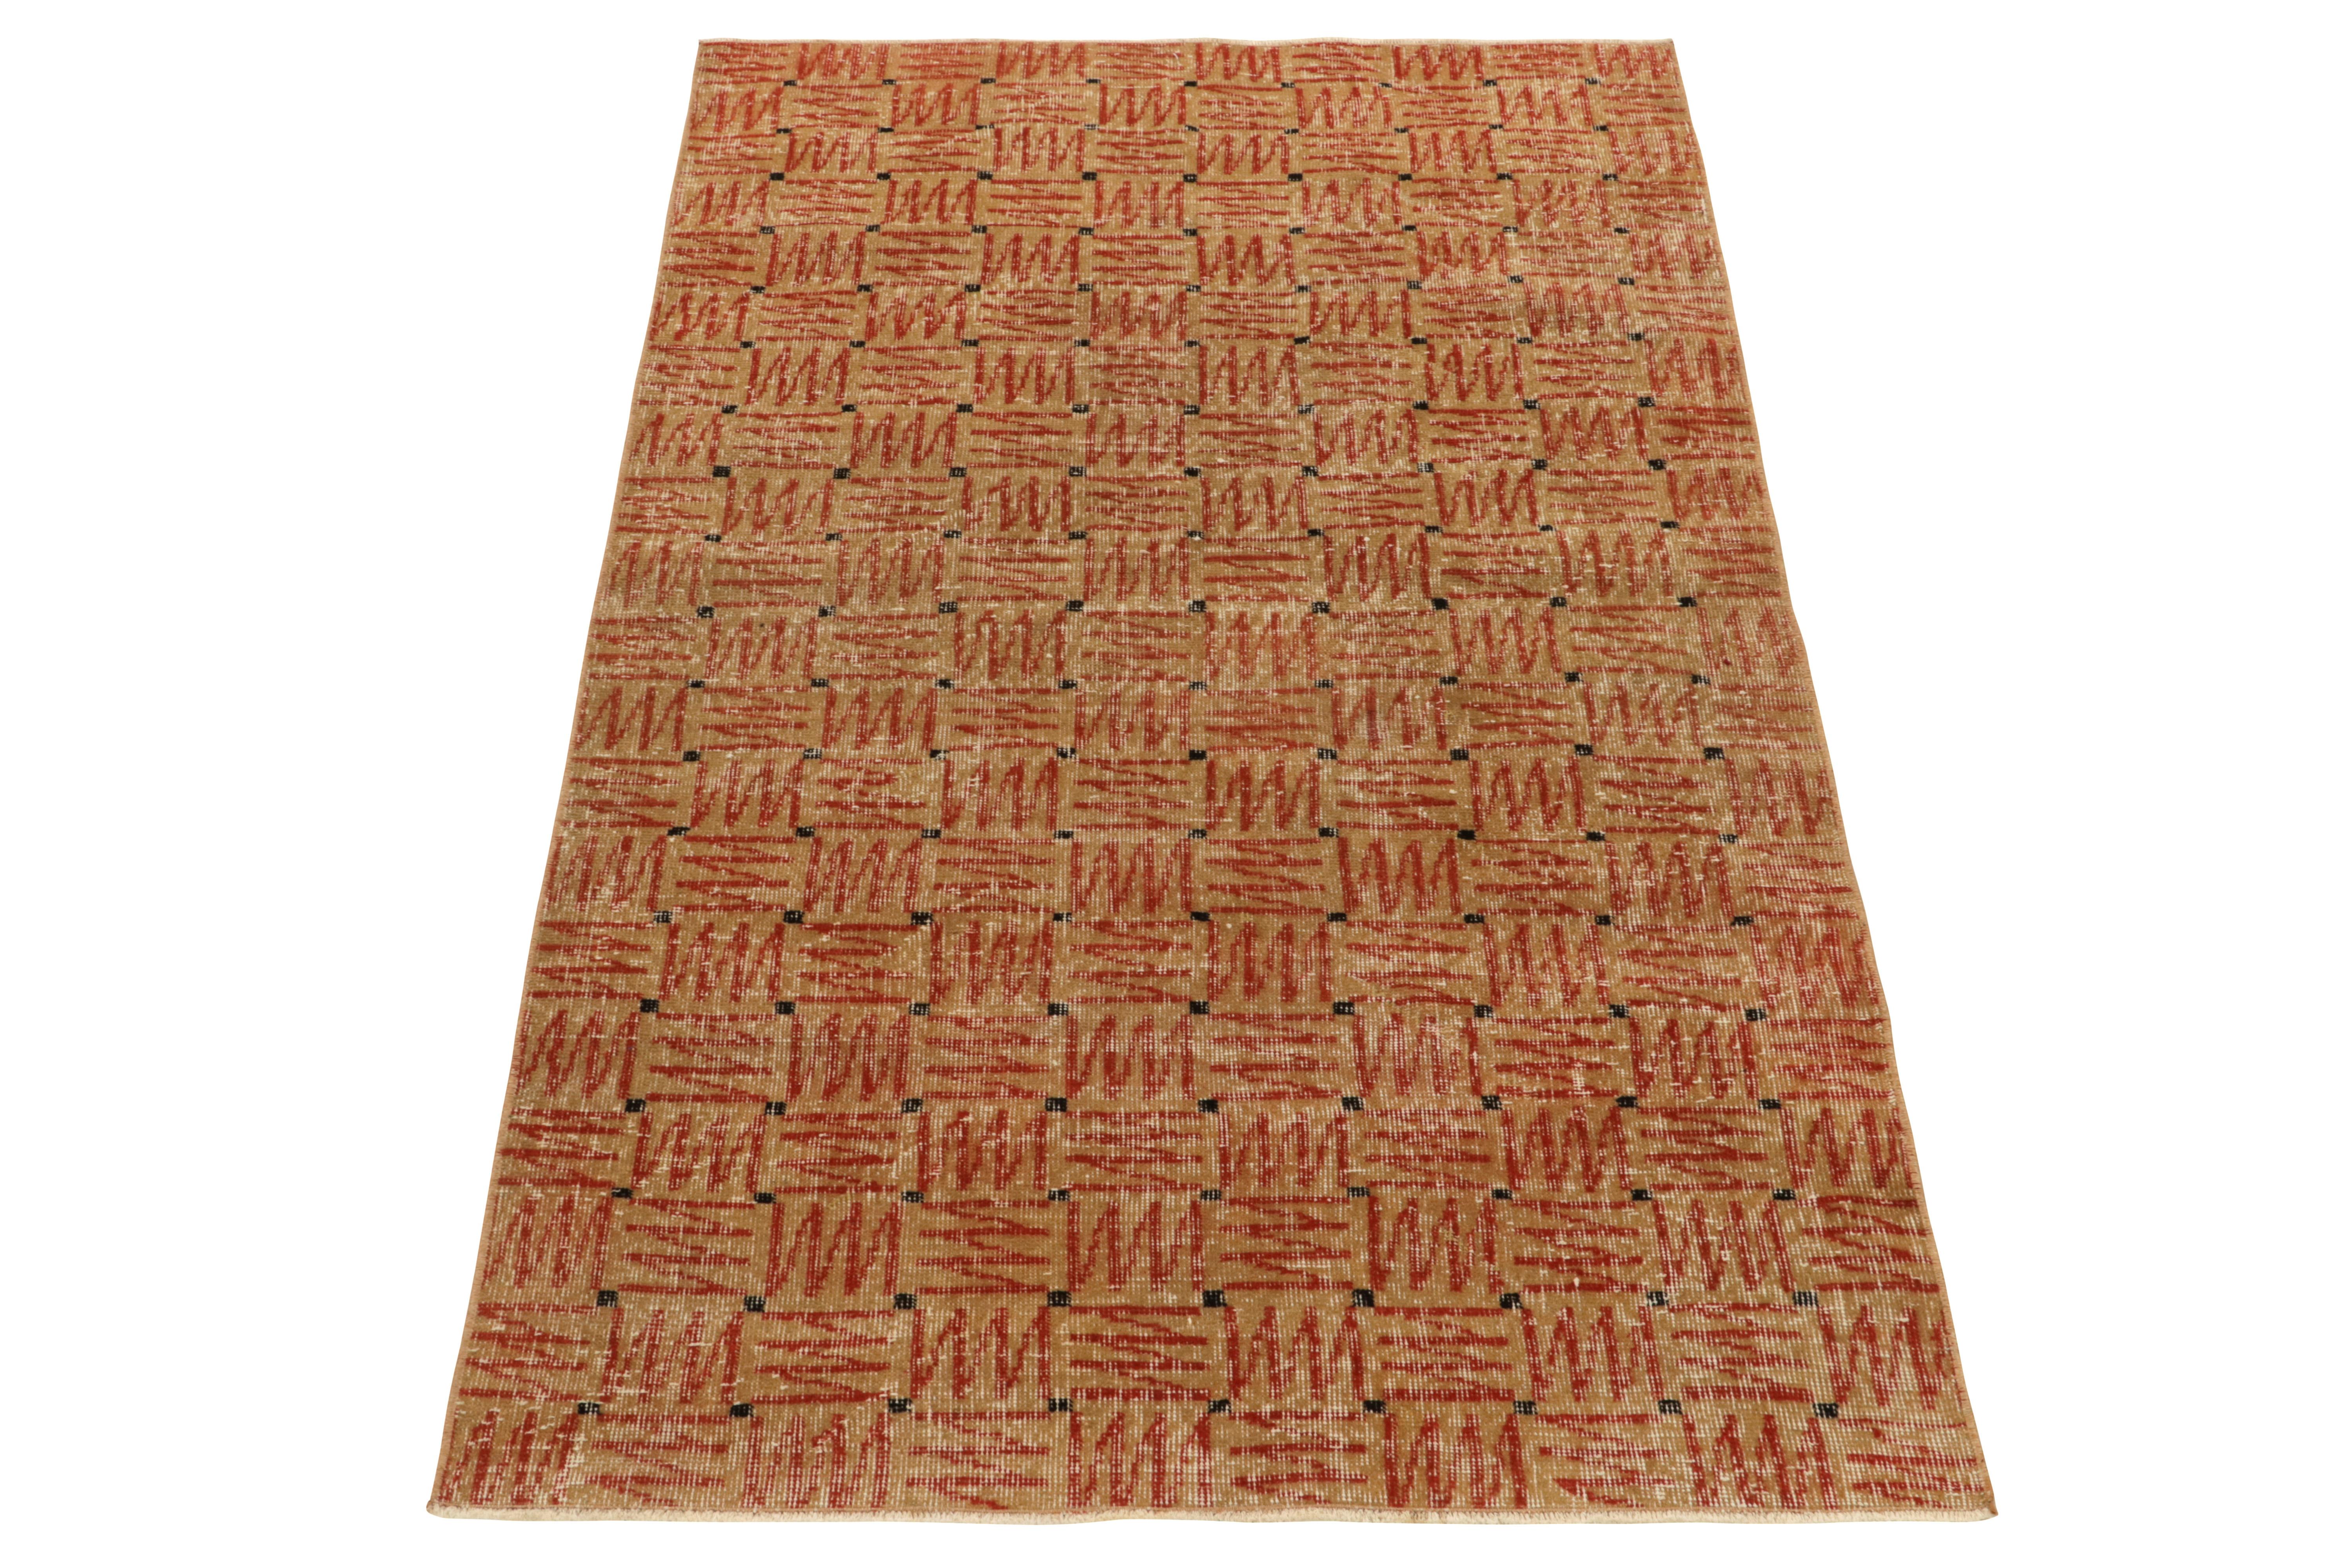 Hand-knotted in wool from Turkey circa 1960-1970, a vintage 4x6 distressed runner from an innovative Turkish atelier. Among the discerning curations joining Rug & Kilim’s commemorative Mid-Century Pasha Collection. 

The graphic piece seemingly